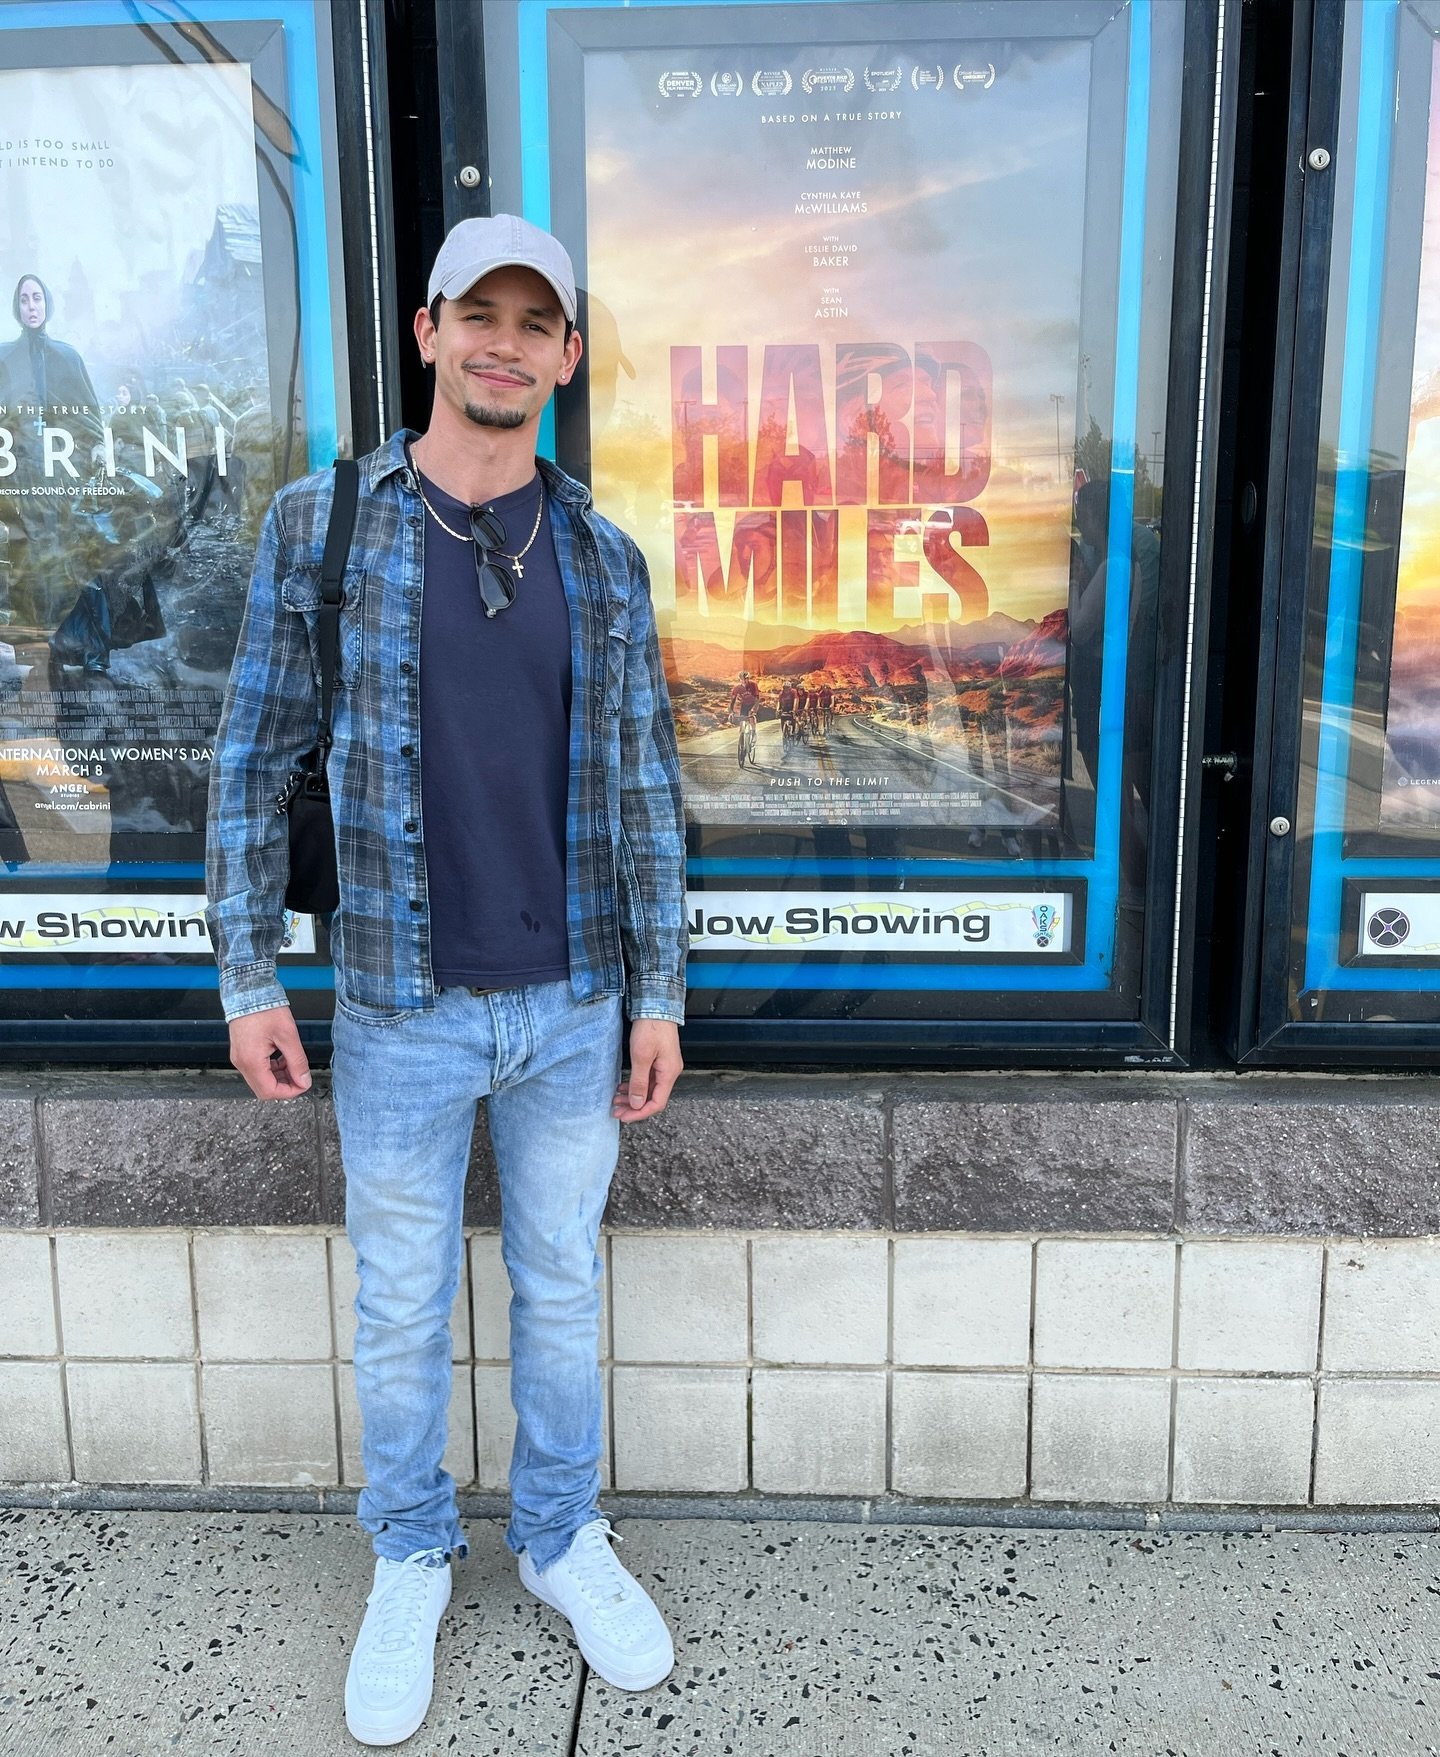 🤩Look who stopped by Oaks Center!🤩

Damien Diaz @damienjdiaz the actor behind Atencio in &ldquo;Hard Miles&rdquo;, visited Oaks Center and made sure to get a photo with one of our posters!

Hard Miles tells the uplifting true story of the bicycling